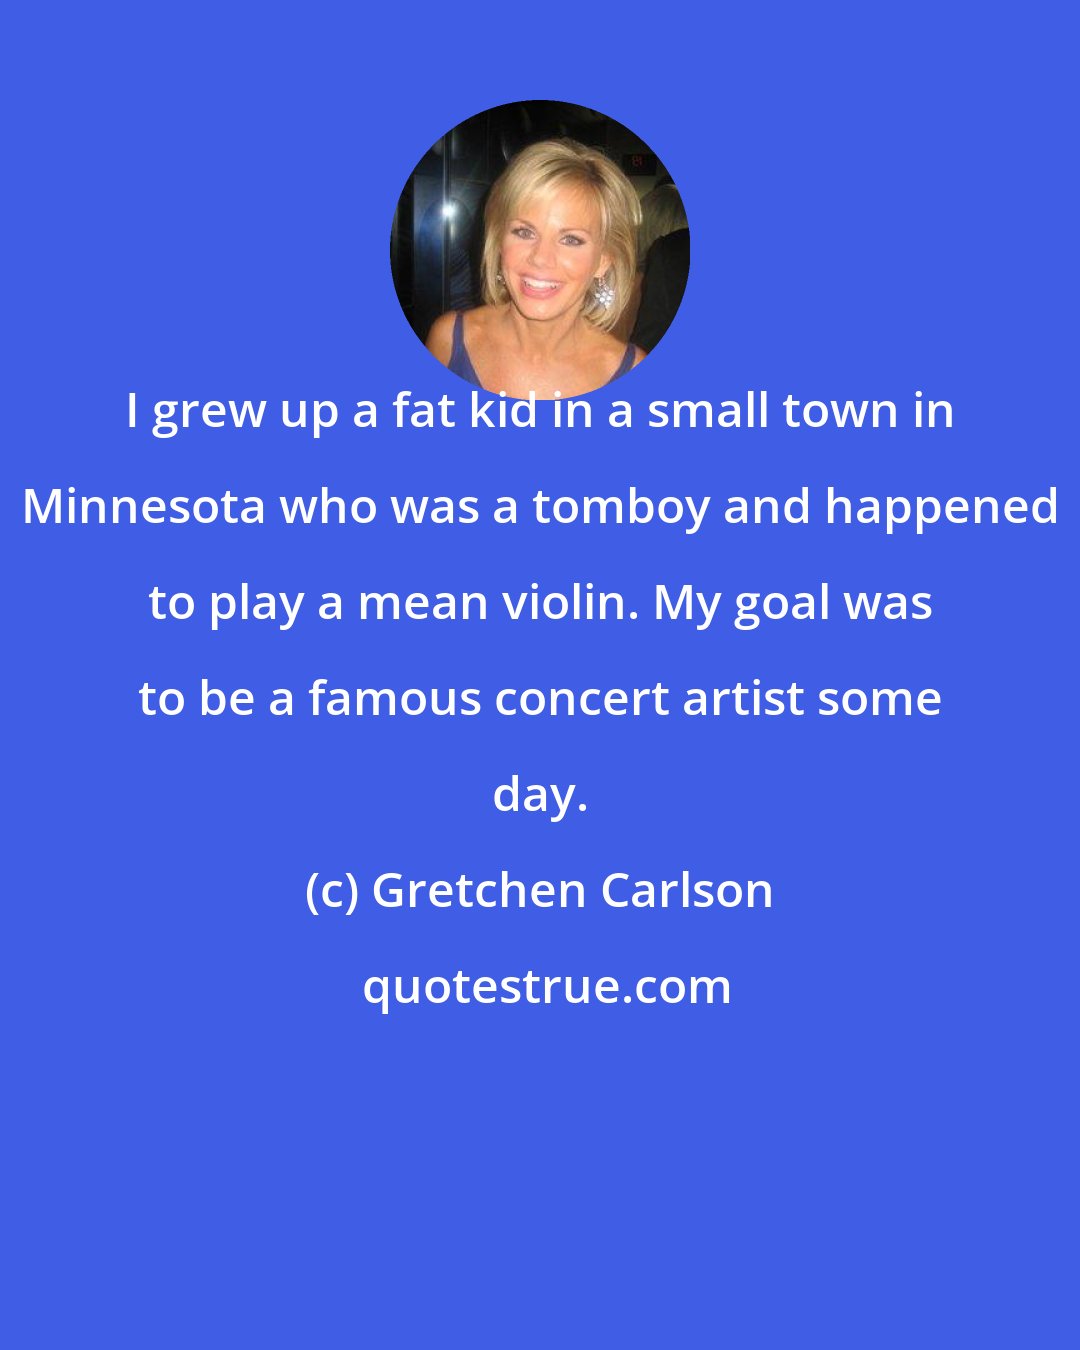 Gretchen Carlson: I grew up a fat kid in a small town in Minnesota who was a tomboy and happened to play a mean violin. My goal was to be a famous concert artist some day.